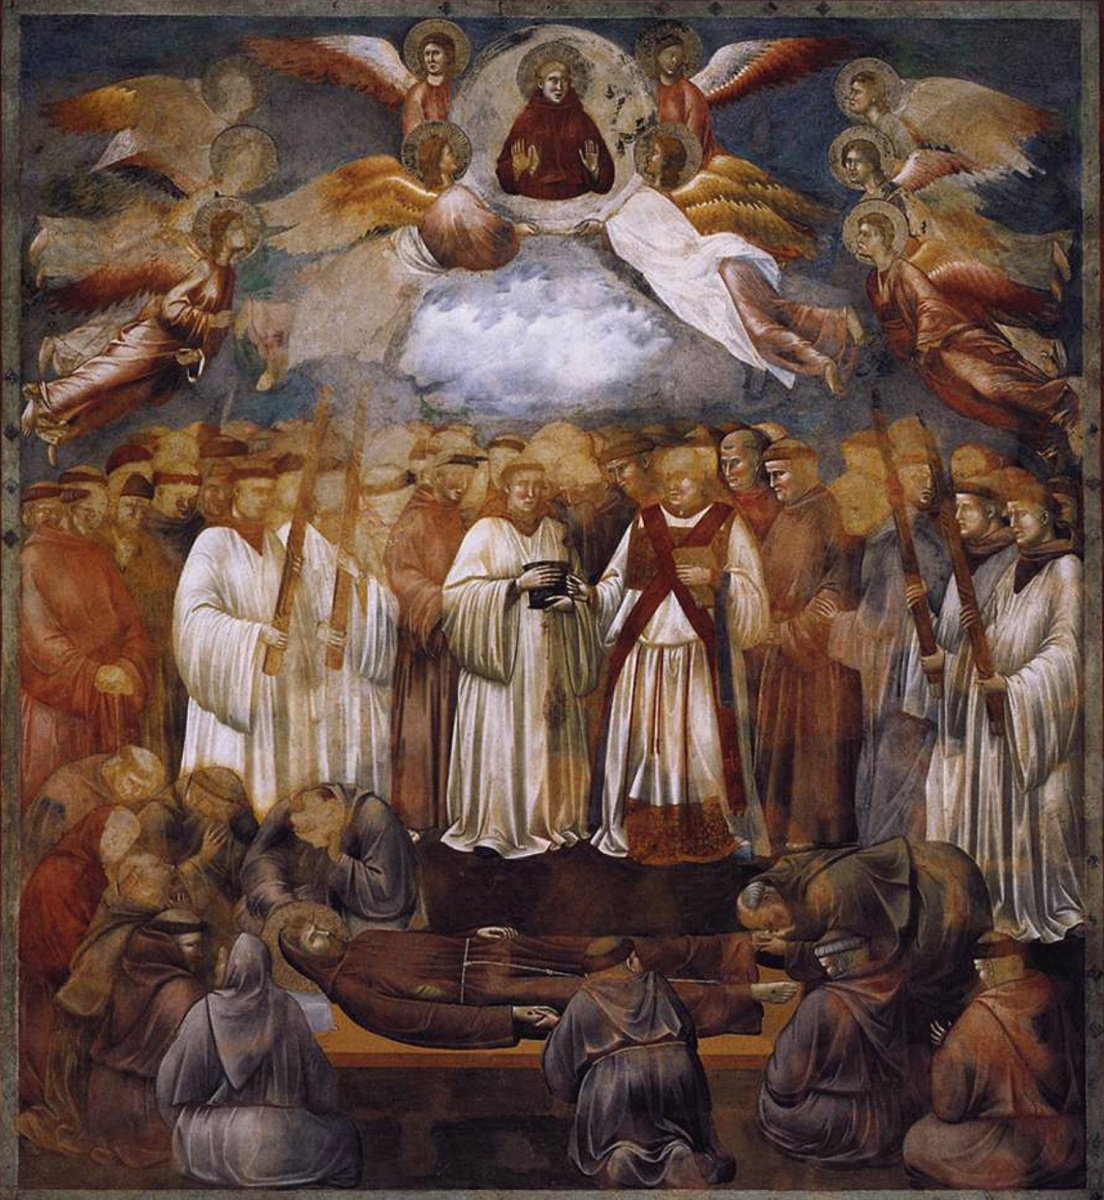 Джотто ди Бондоне. The death and ascension of St. Francis. The Legend of St. Francis